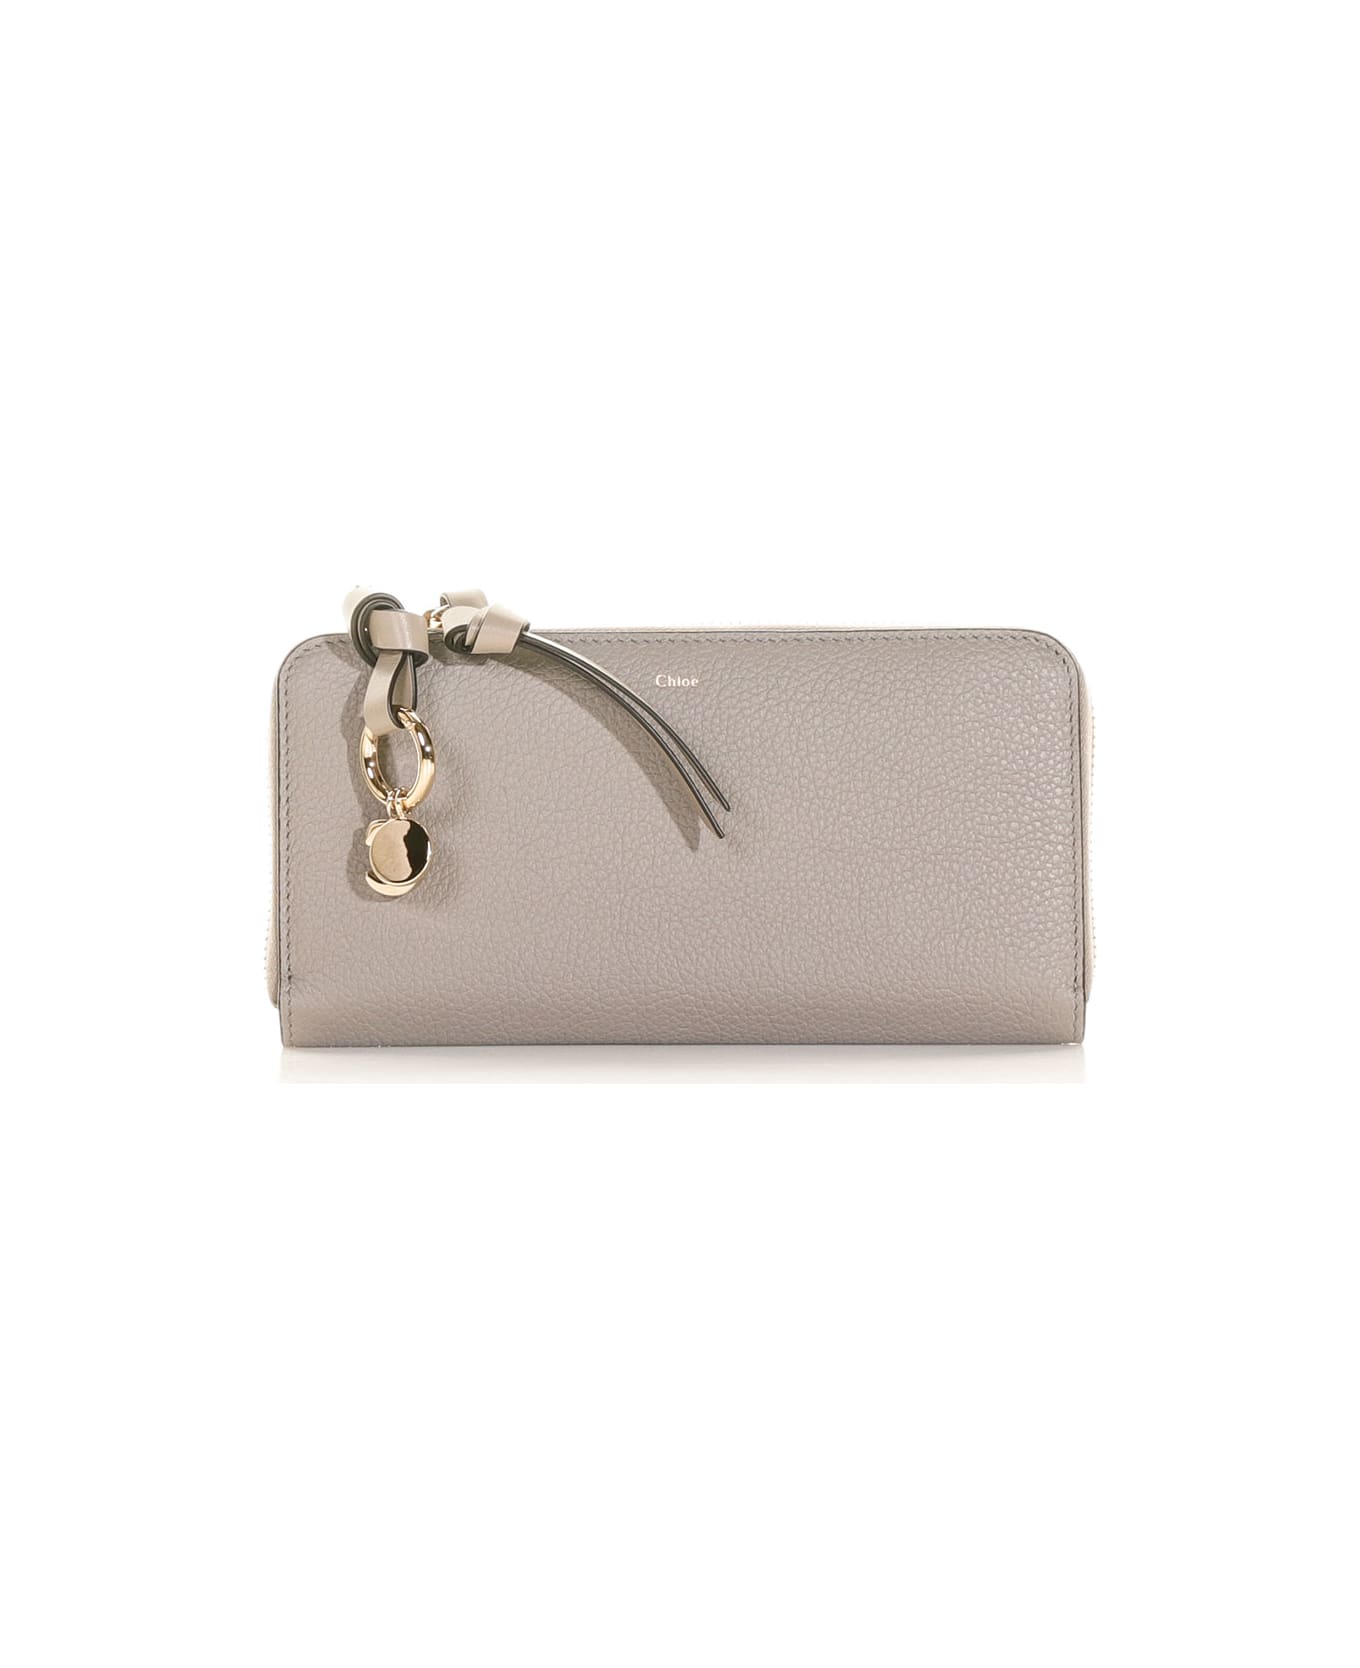 Chloé Full Zip Leather Wallet - CASHMERE GREY 財布